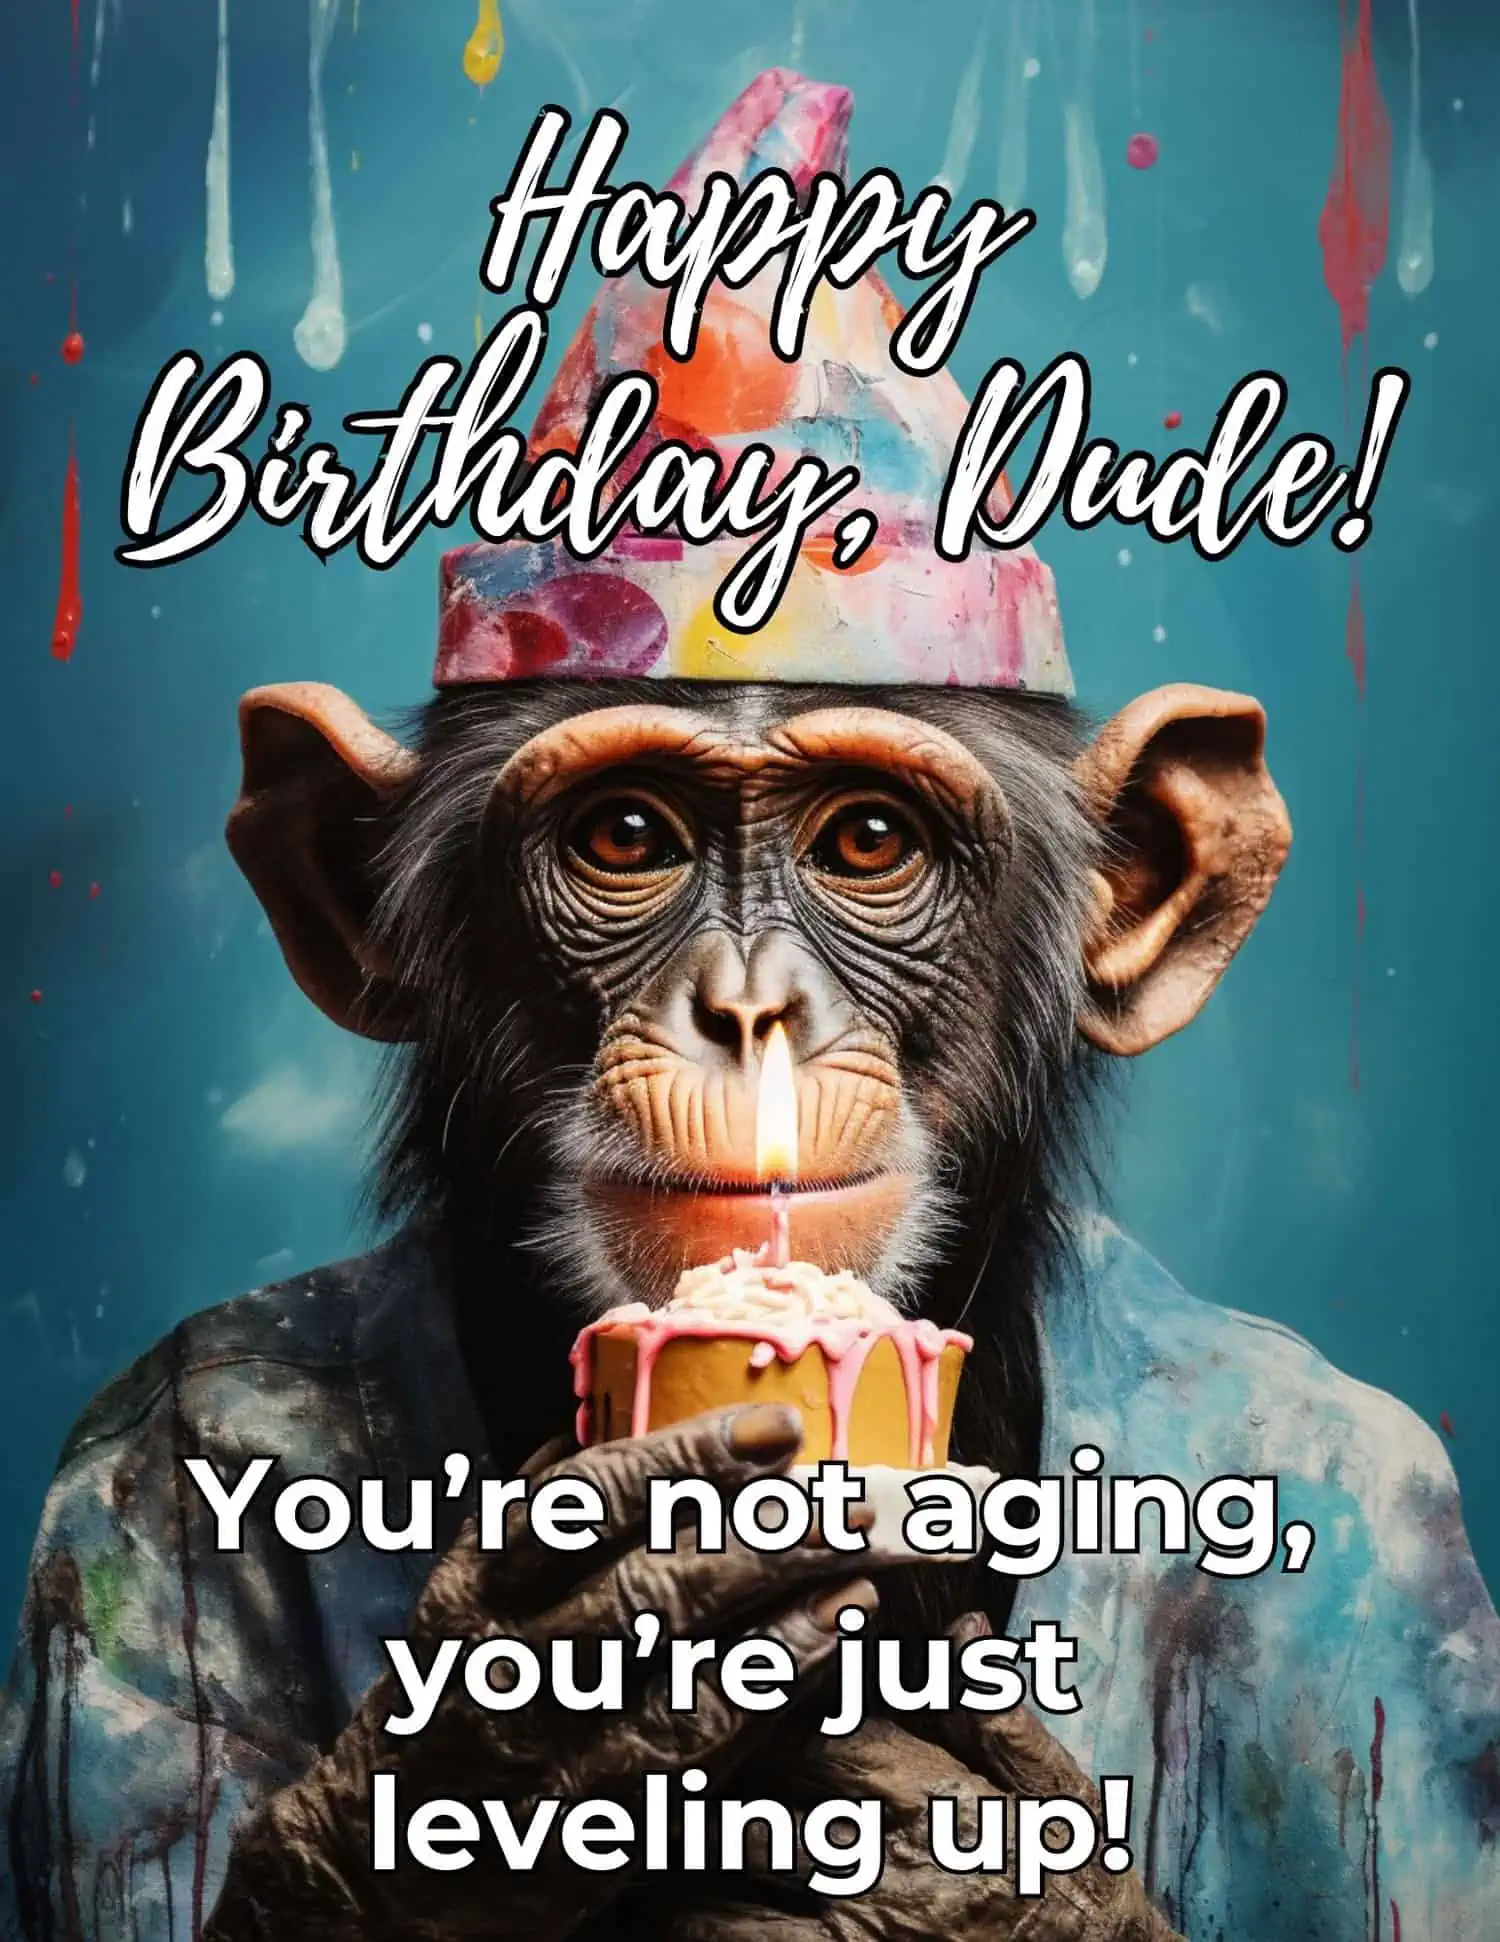 A collection of humorous messages to tickle your brother's funny bone on his birthday.